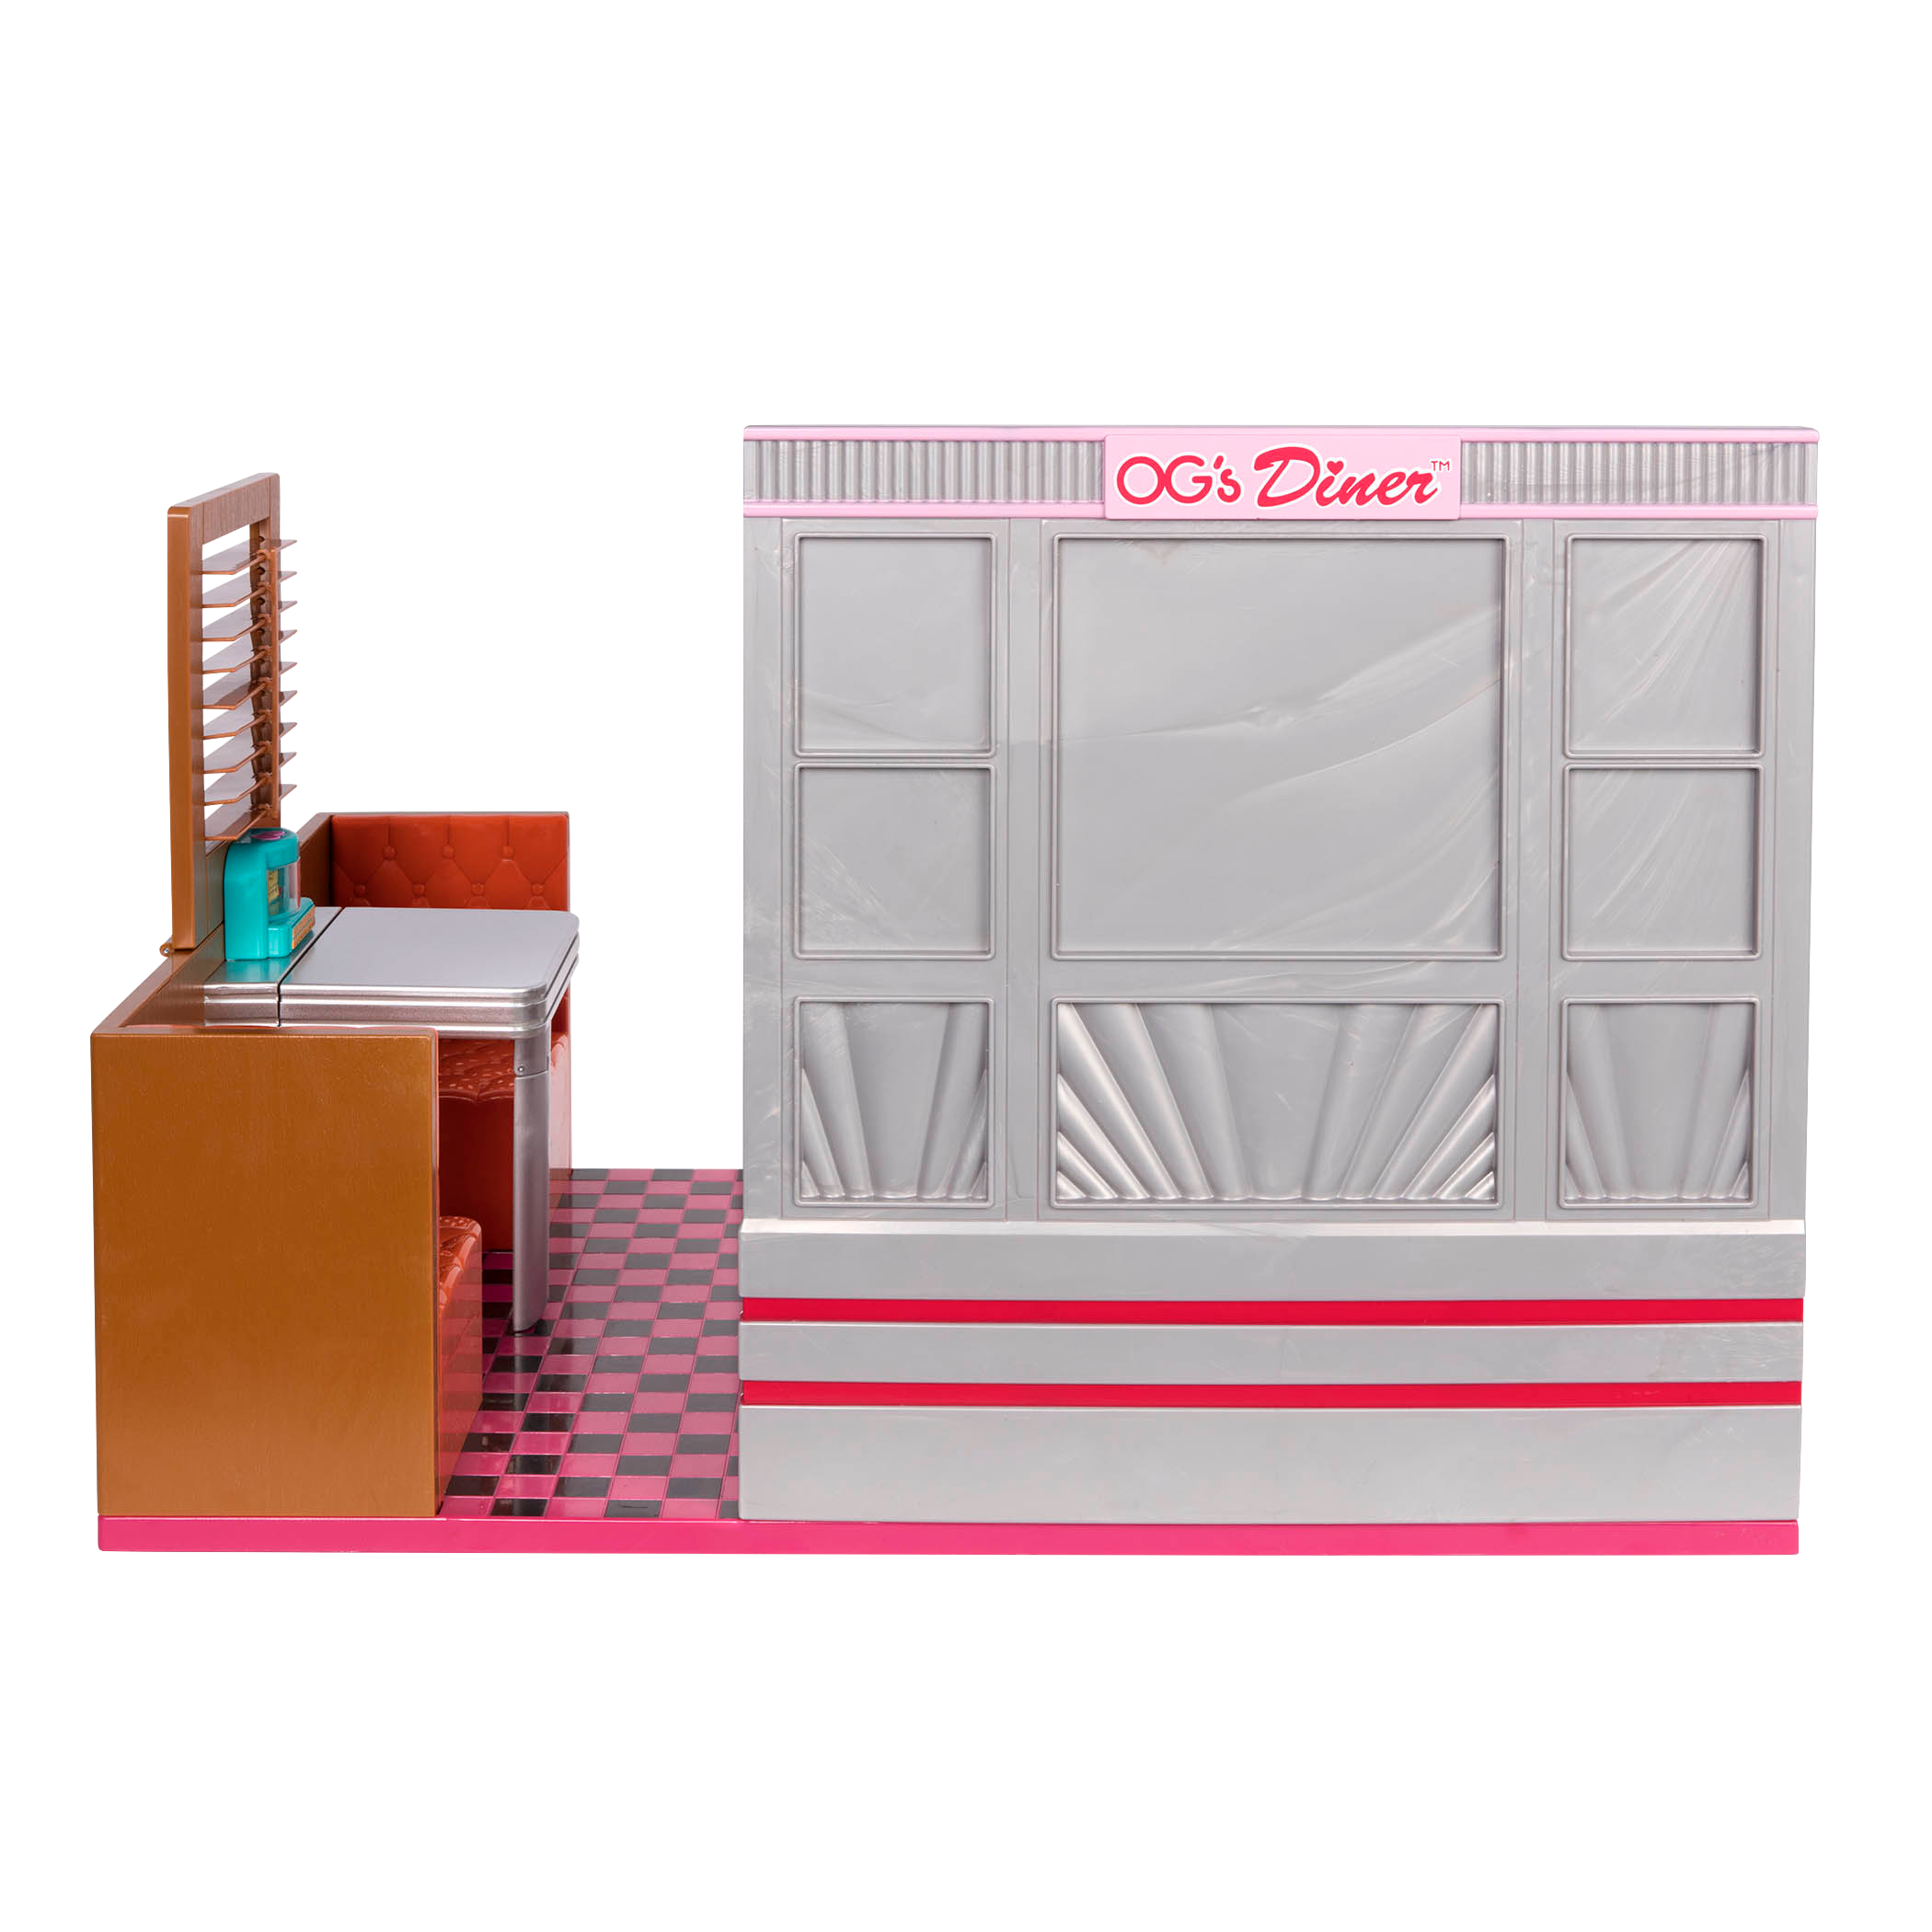 Bite to Eat Retro Diner for 18-inch Dolls